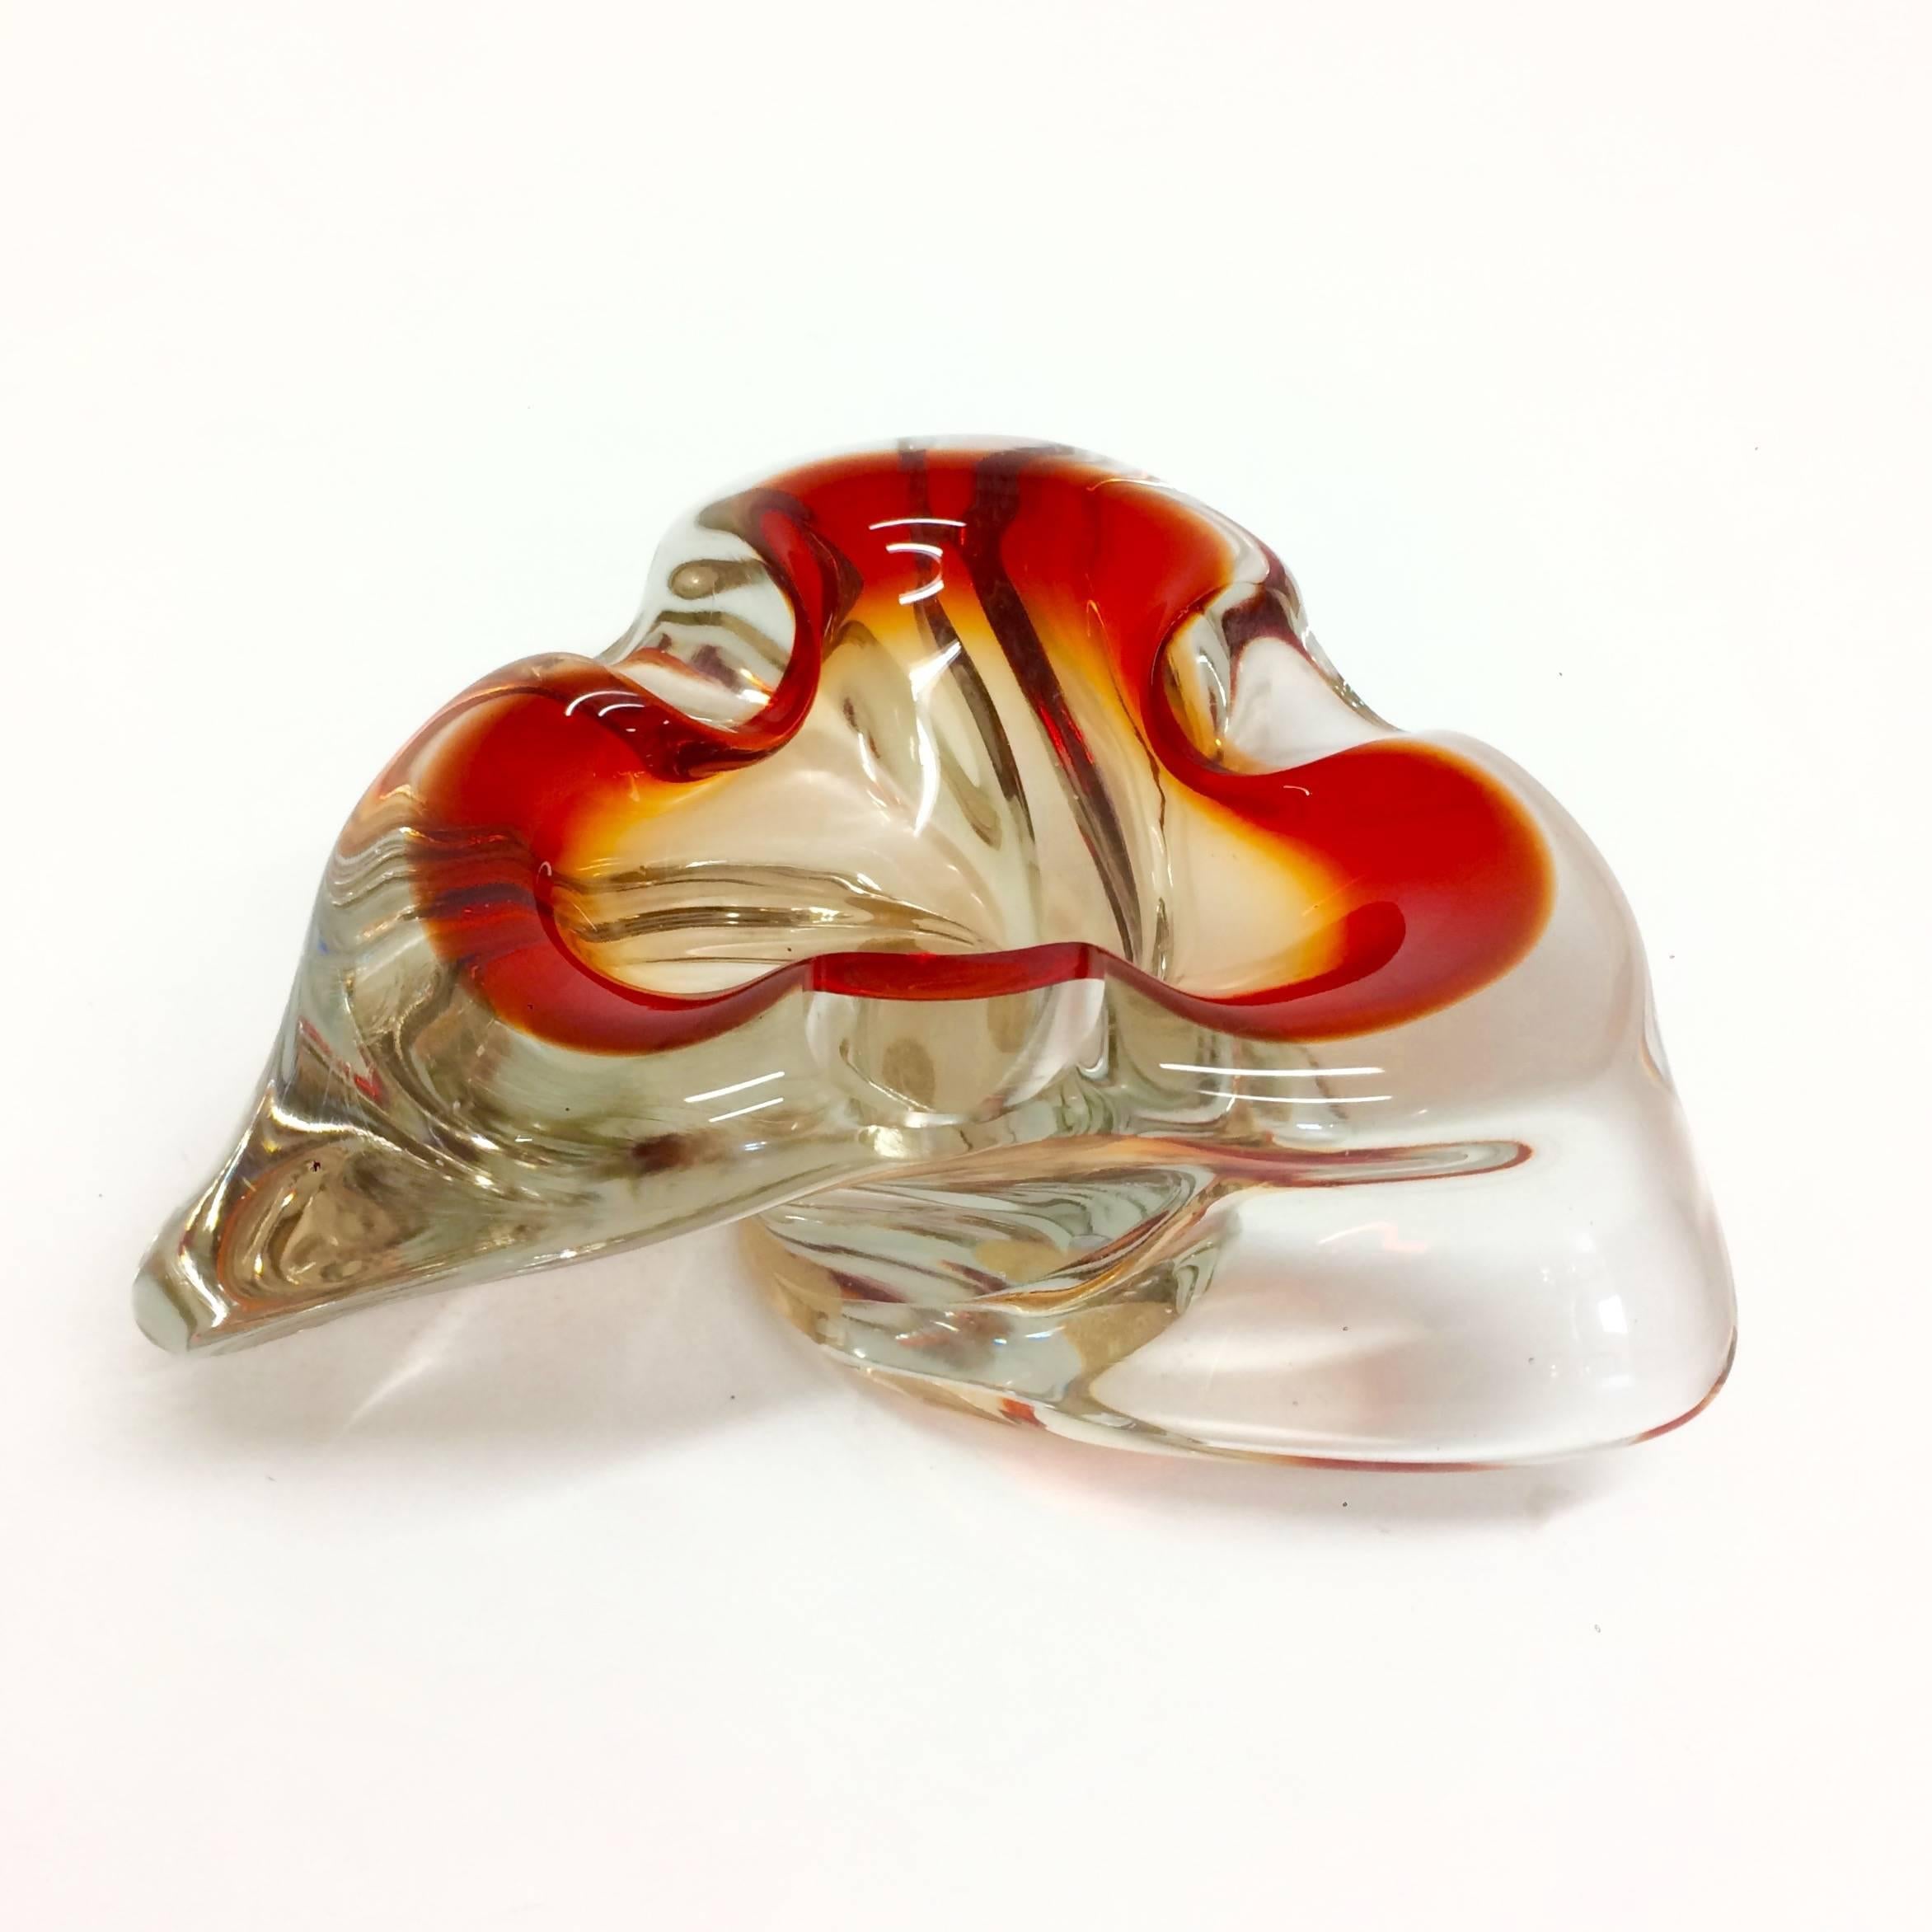 Murano Art Glass Bowl in Clear and Red In Excellent Condition For Sale In New Hyde Park, NY